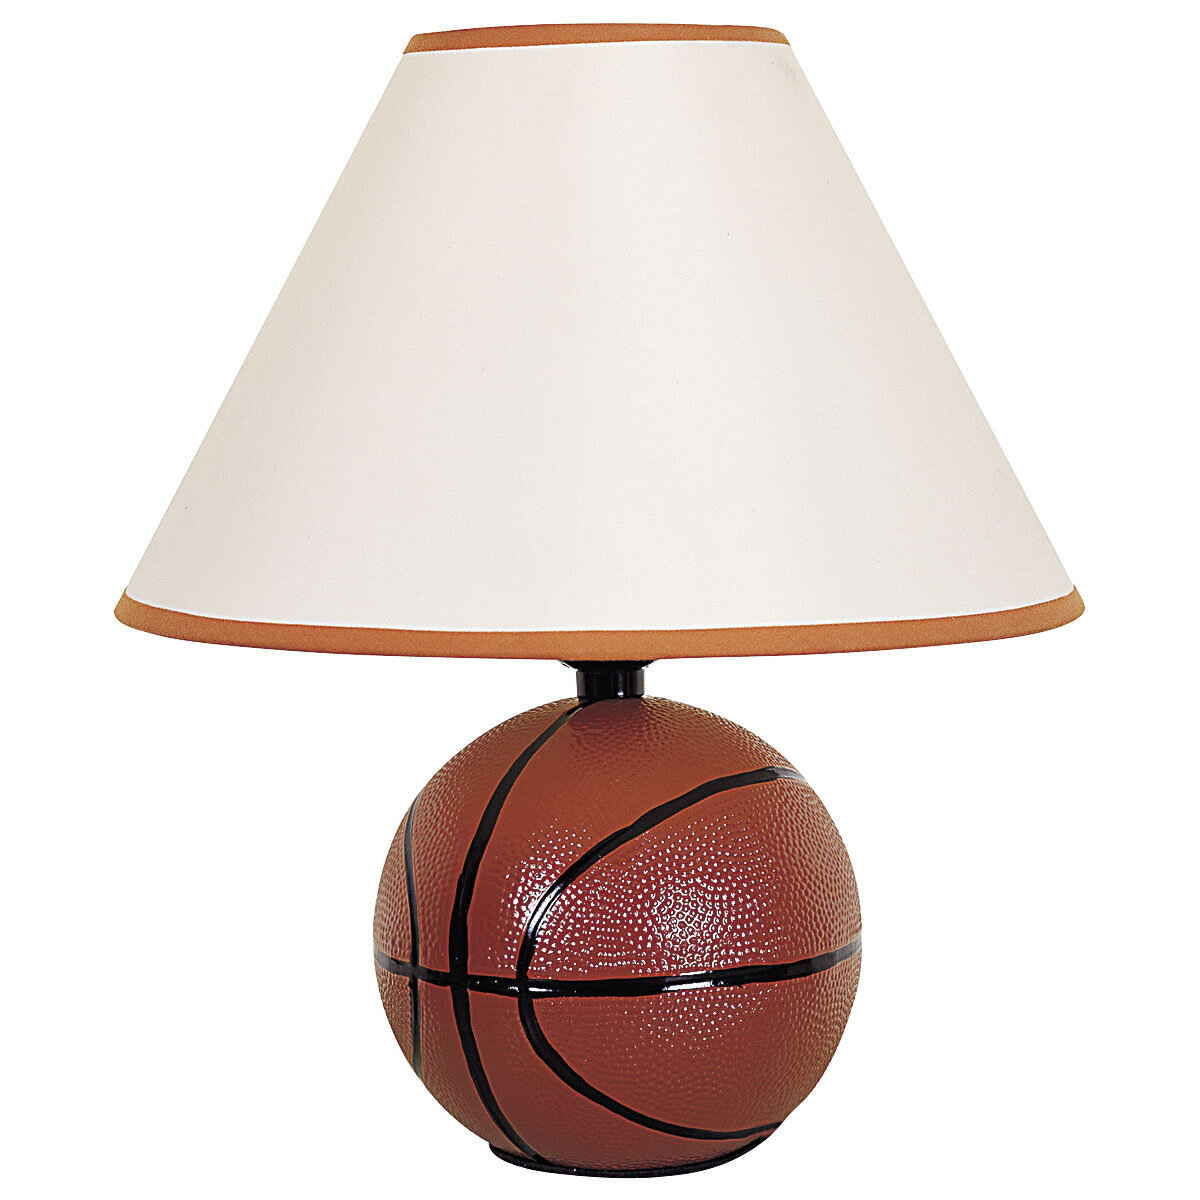 Ceramic Basketball 5.75" H Table Lamp with Empire Shade